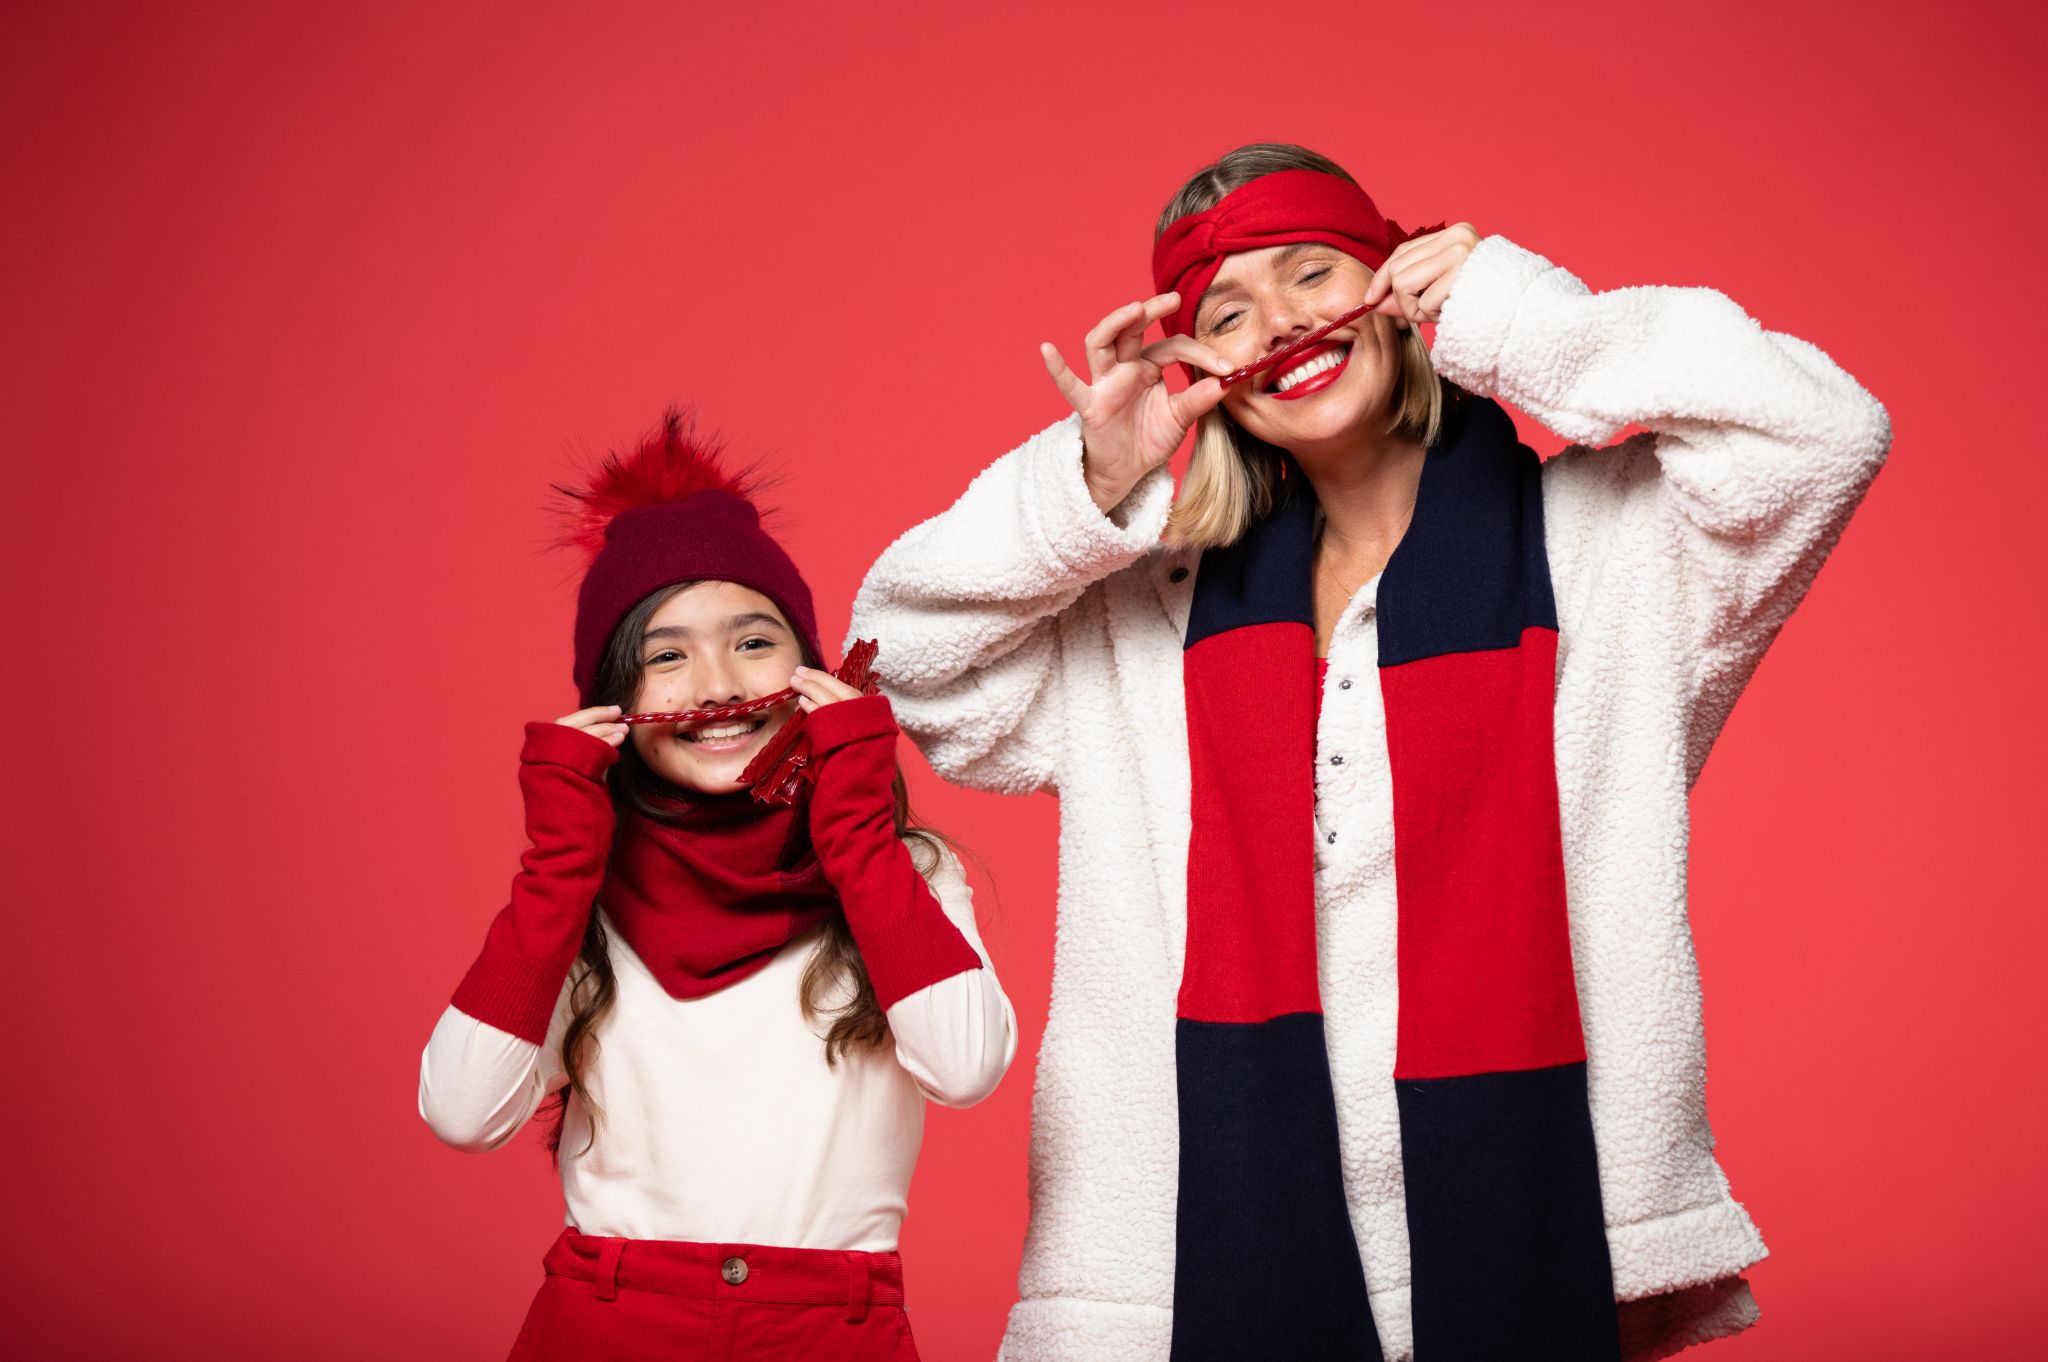 Girl model wearing red headband, scarf and pants along with white top and female model wearing red hand band, white jacket and black and red scarf against a red backdrop